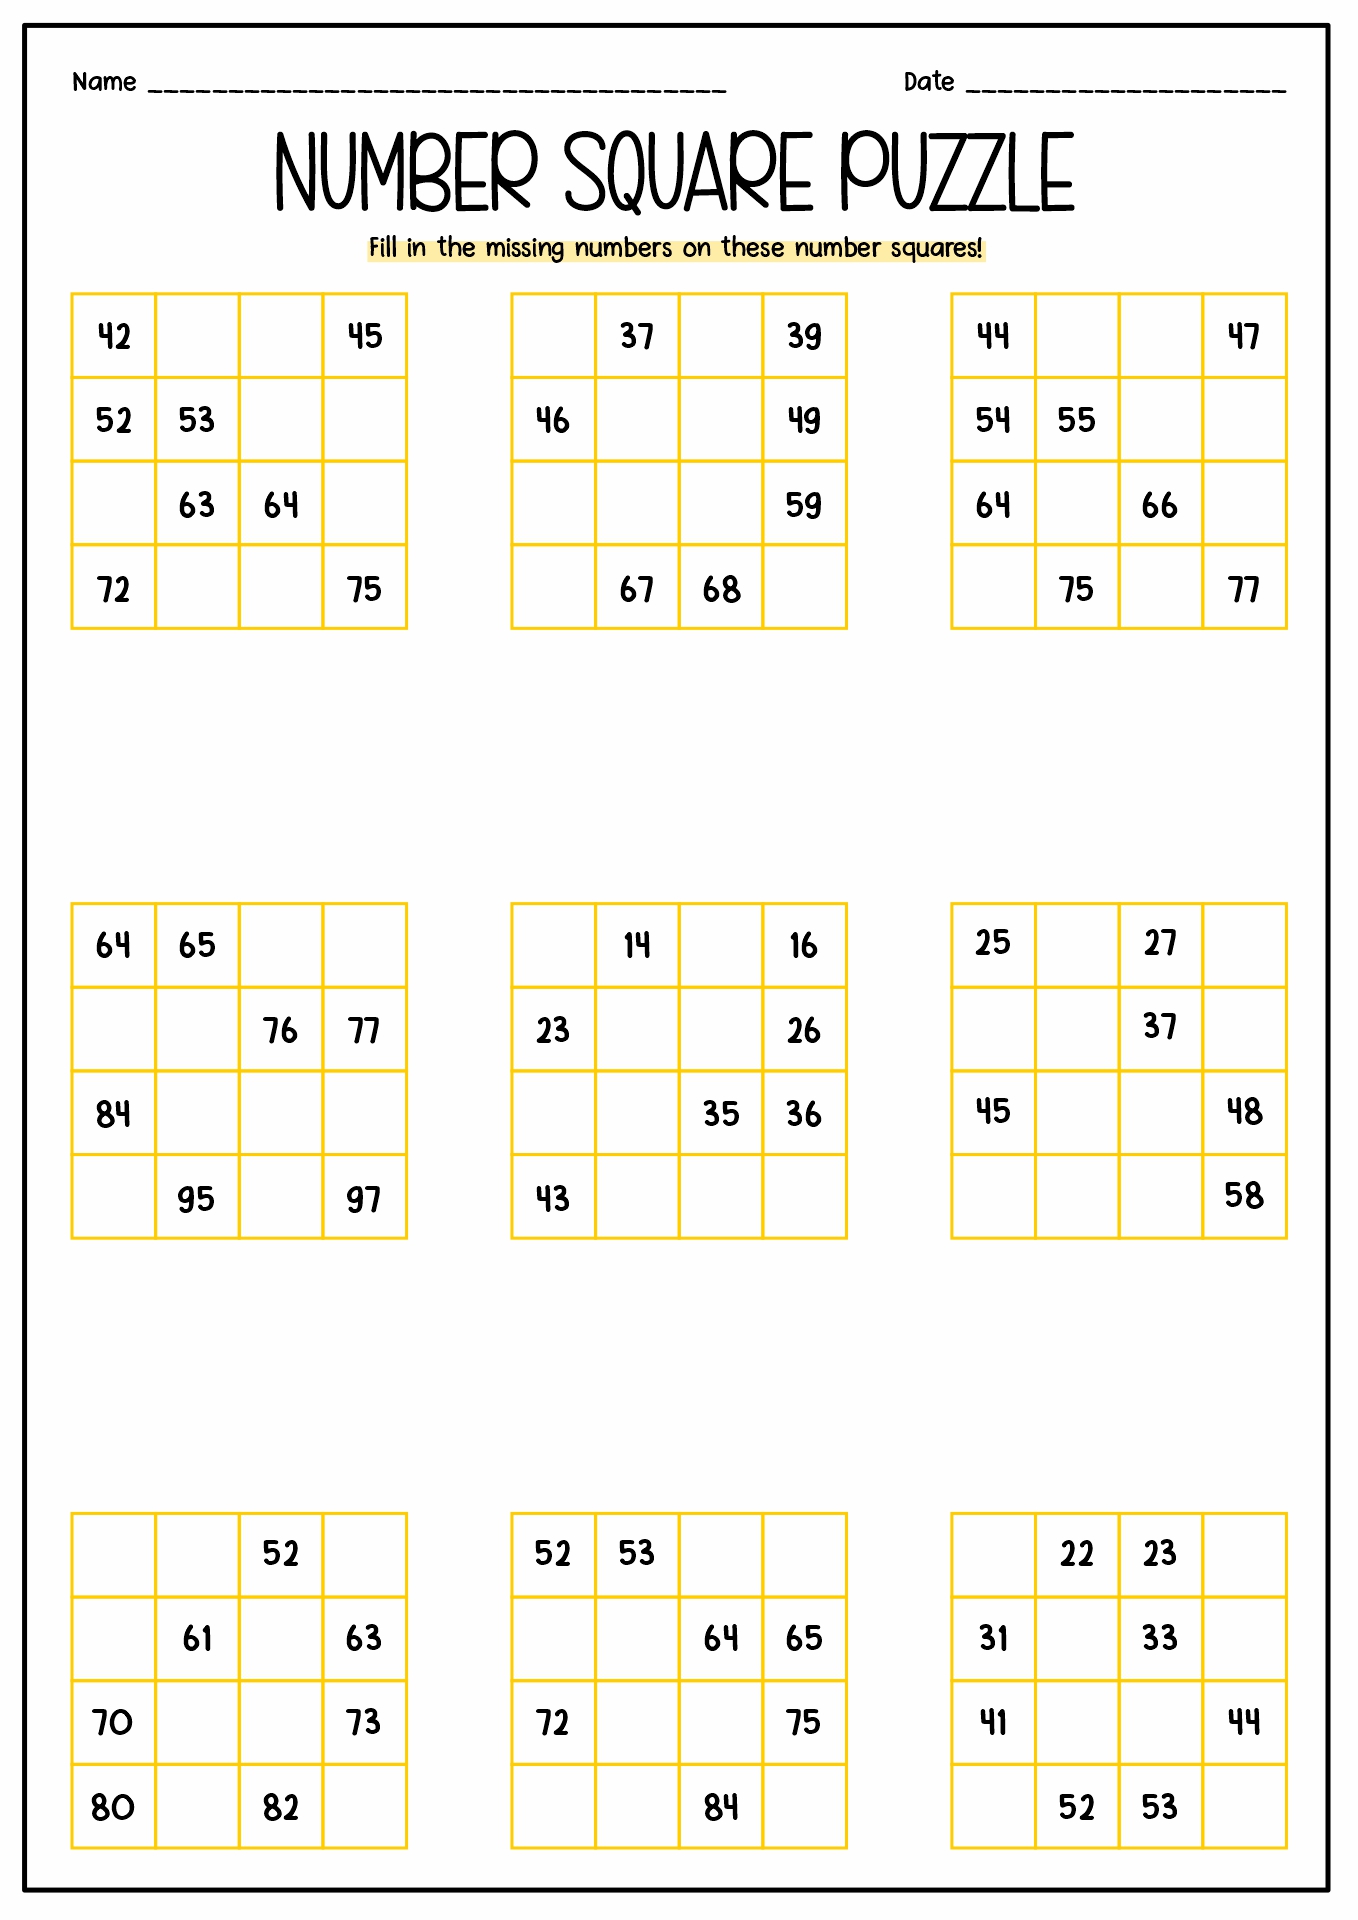 Puzzle with Numbers in Squares Image